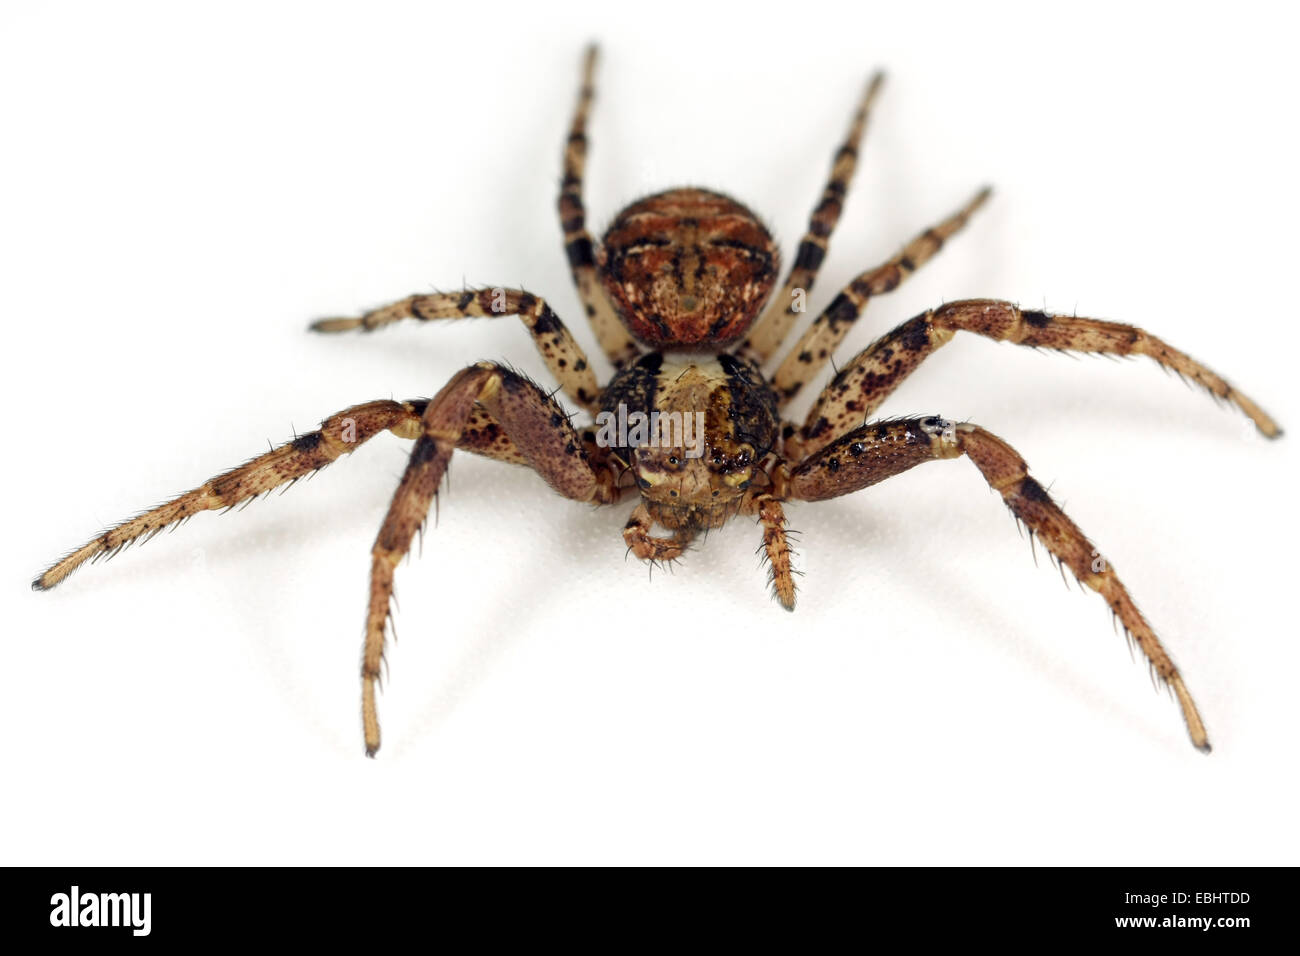 A female Crab spider (Xysticus audax) on white background. Family Thomisidae, Crab spiders. Stock Photo